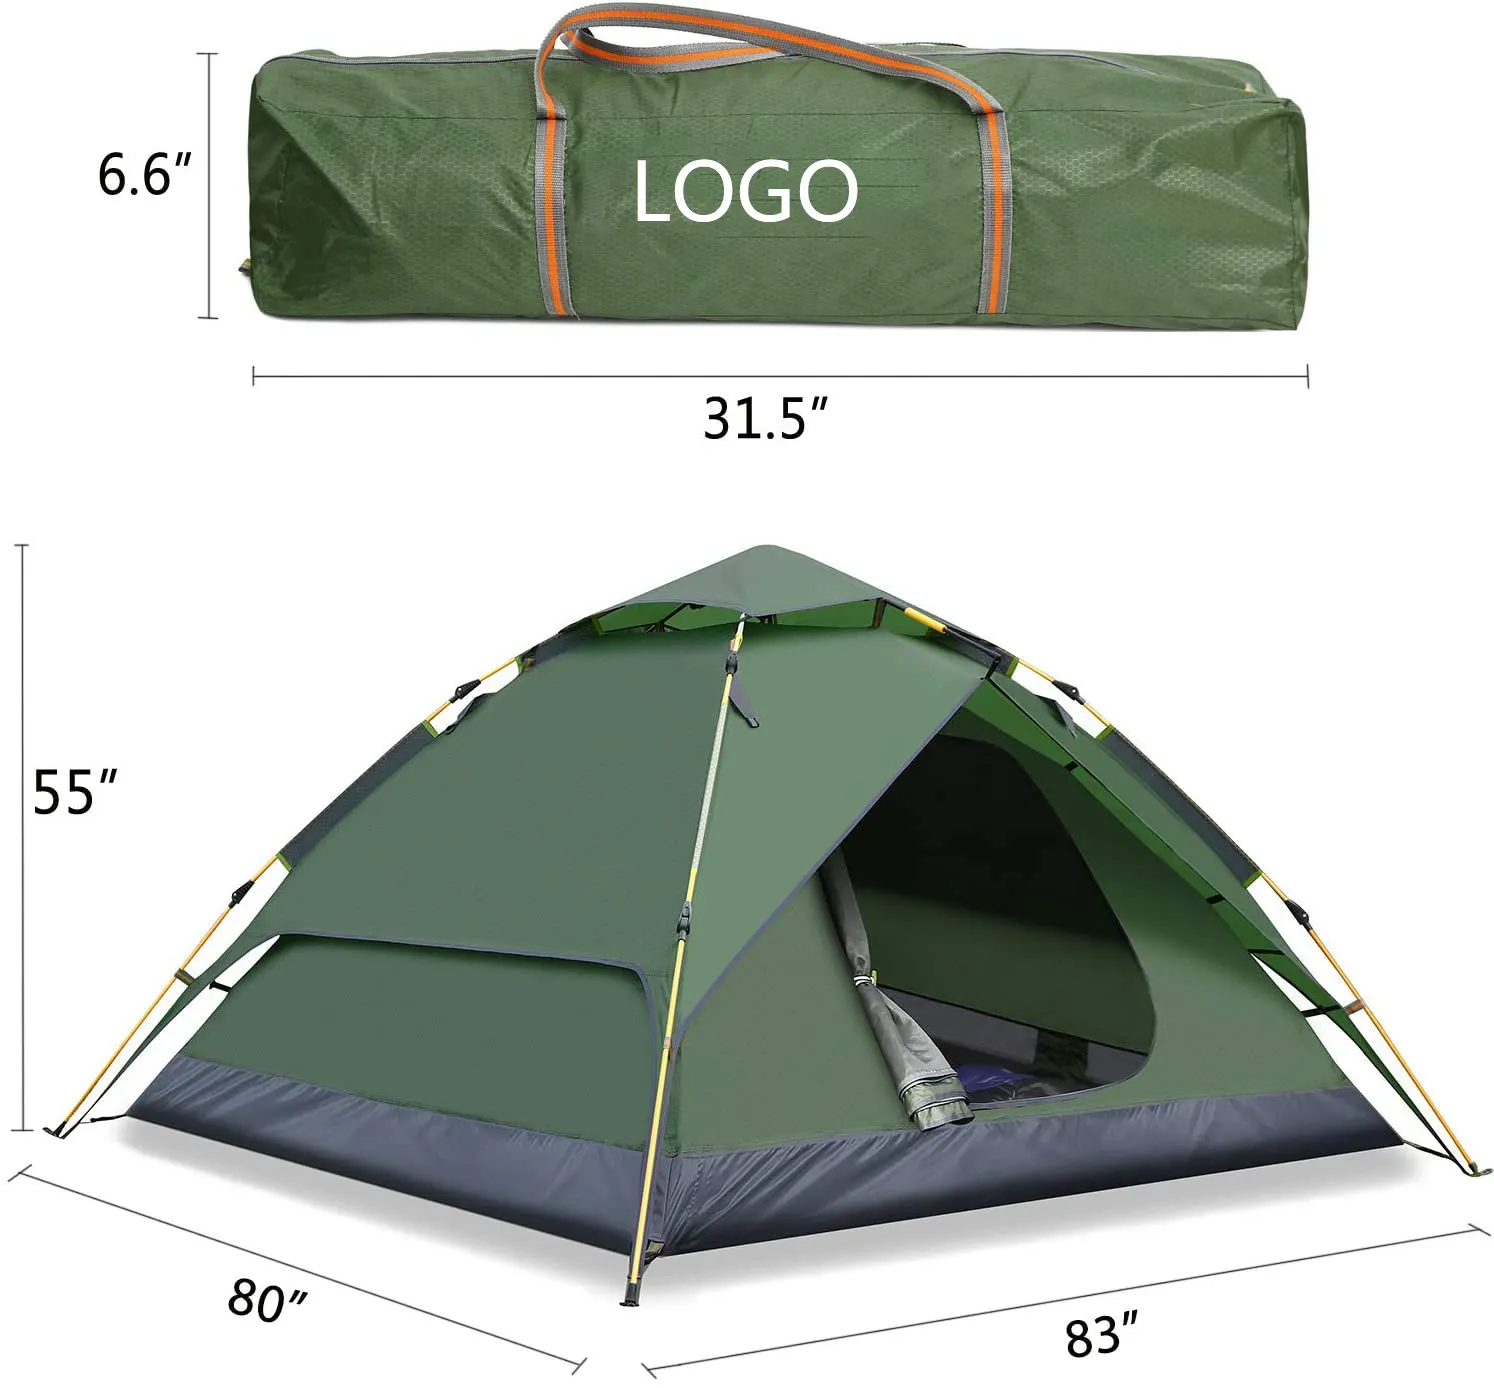 Double Layer Automatic Hydraulic Tent 3-4 Person Instant Setup Waterproof Camping Tent camping tent for sale beach outdoor